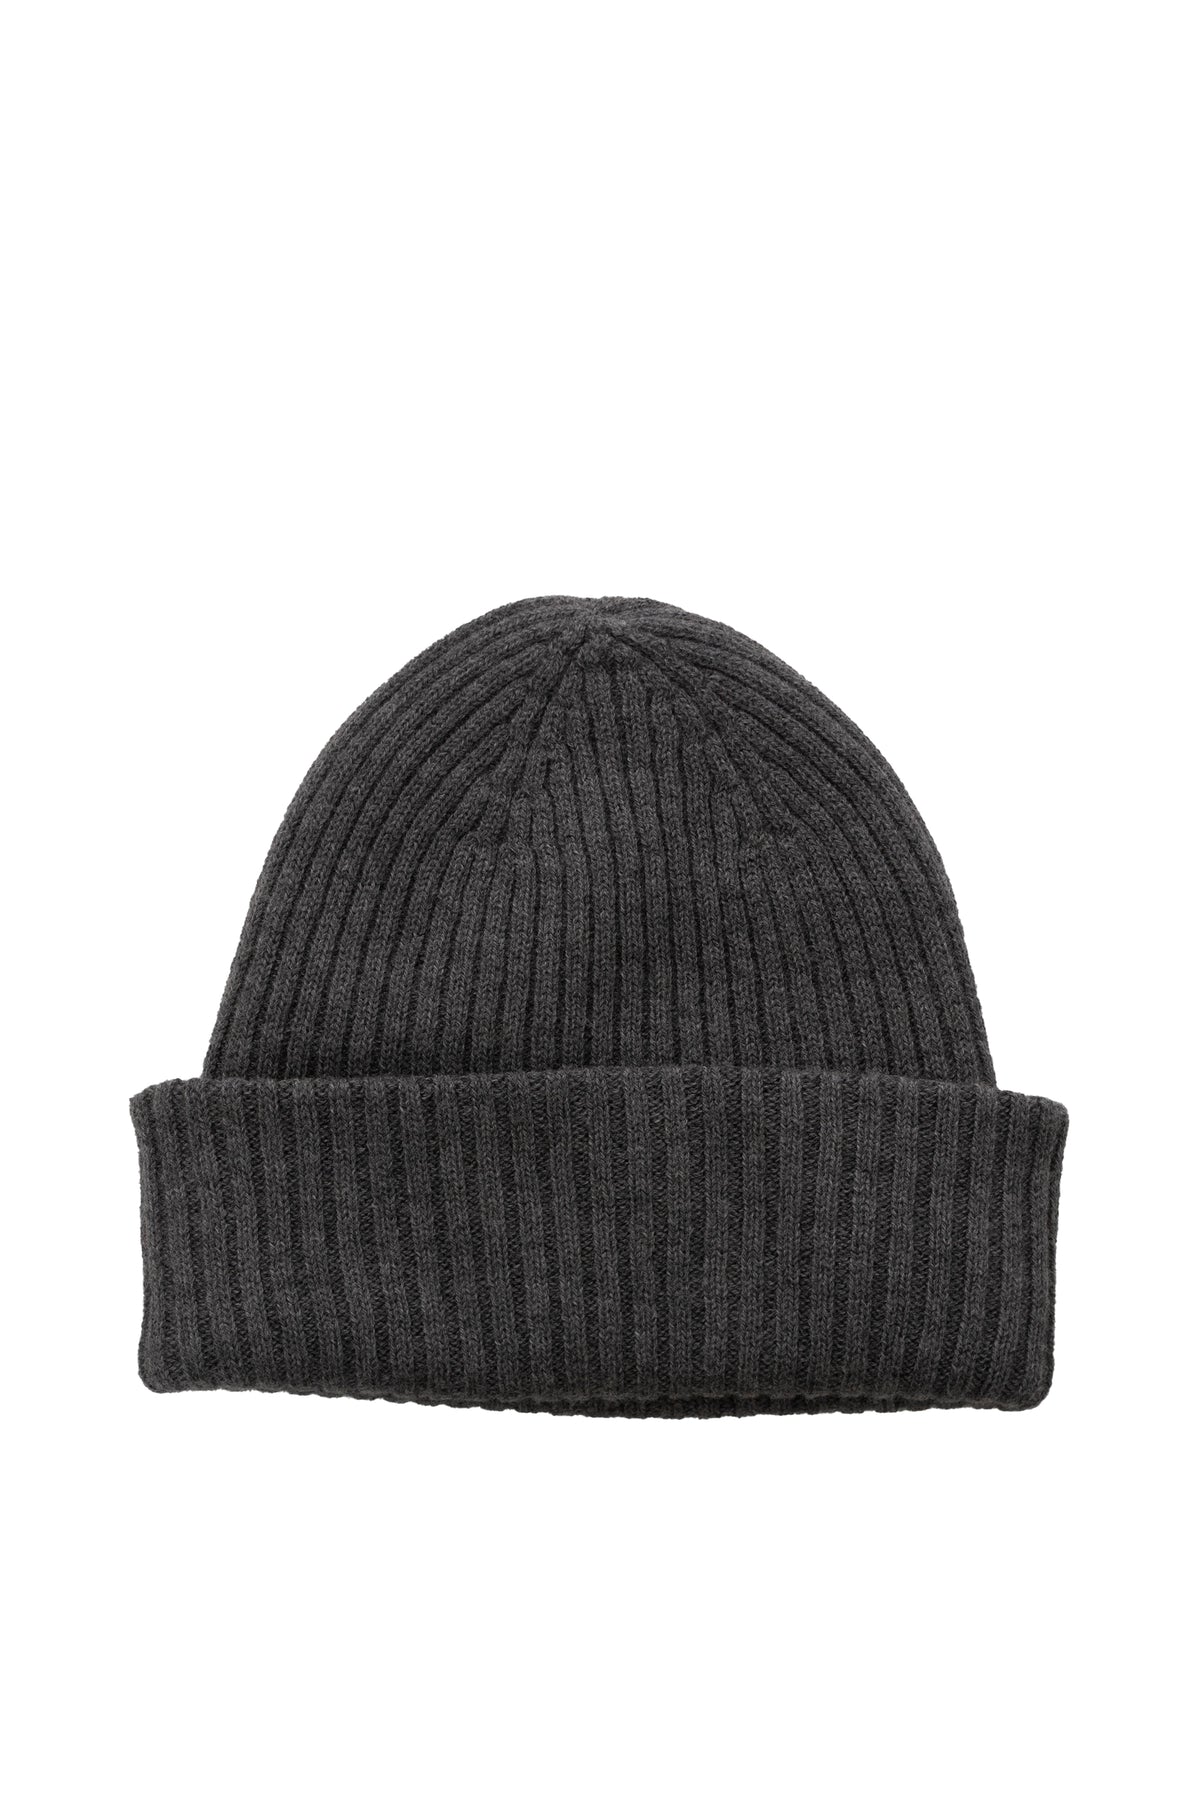 GREY LOGO PATCHED KNIT BEANIE / GRY